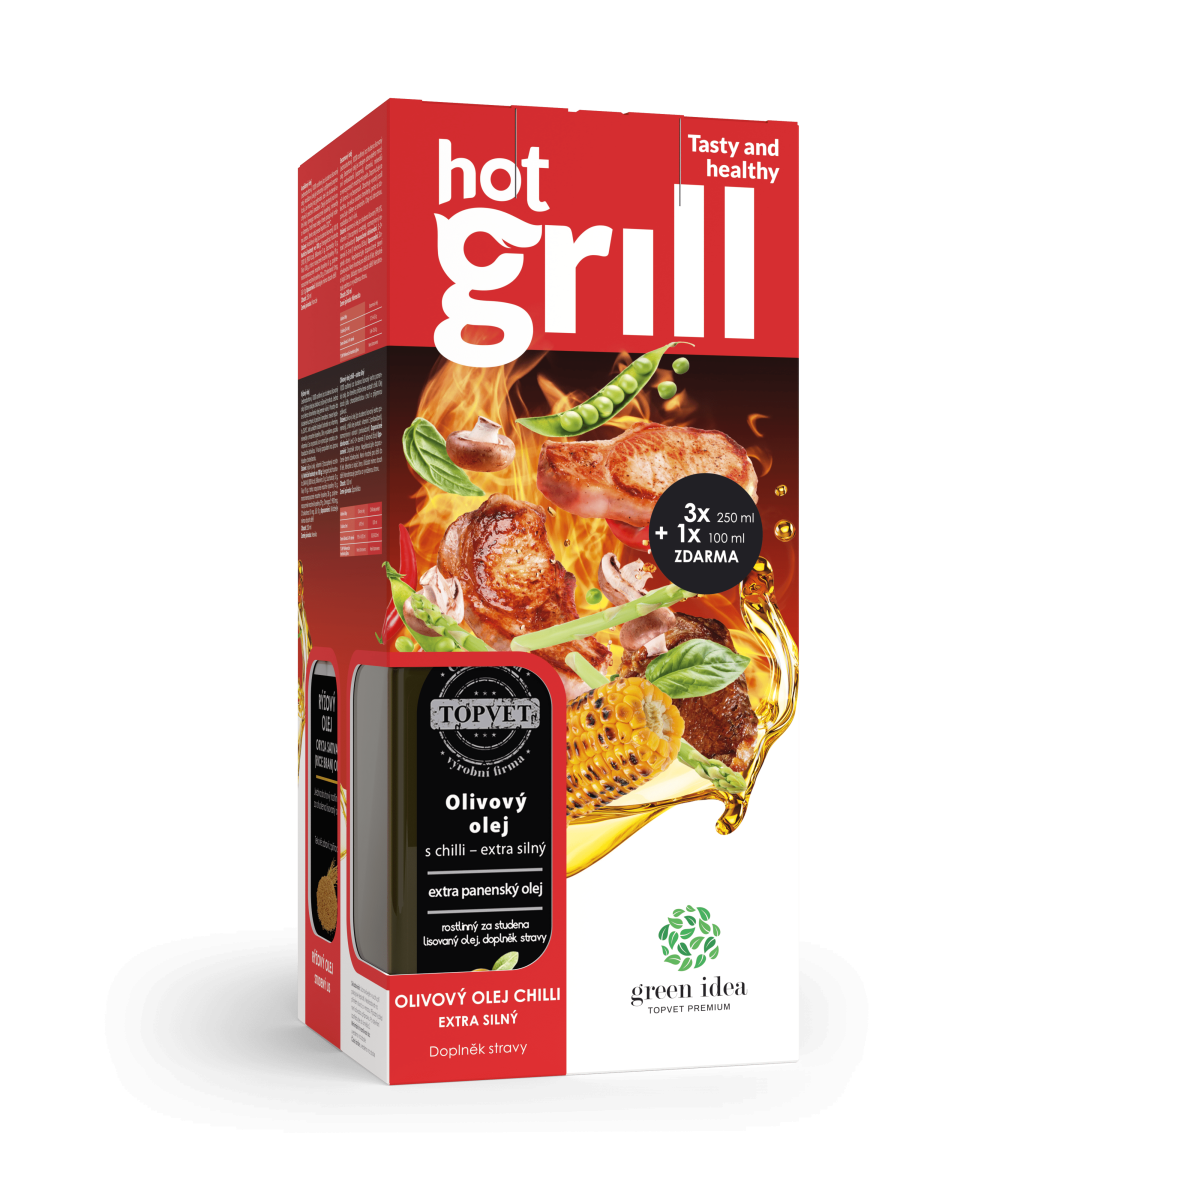 Hot grill - Tasty and healthy 3+1 free